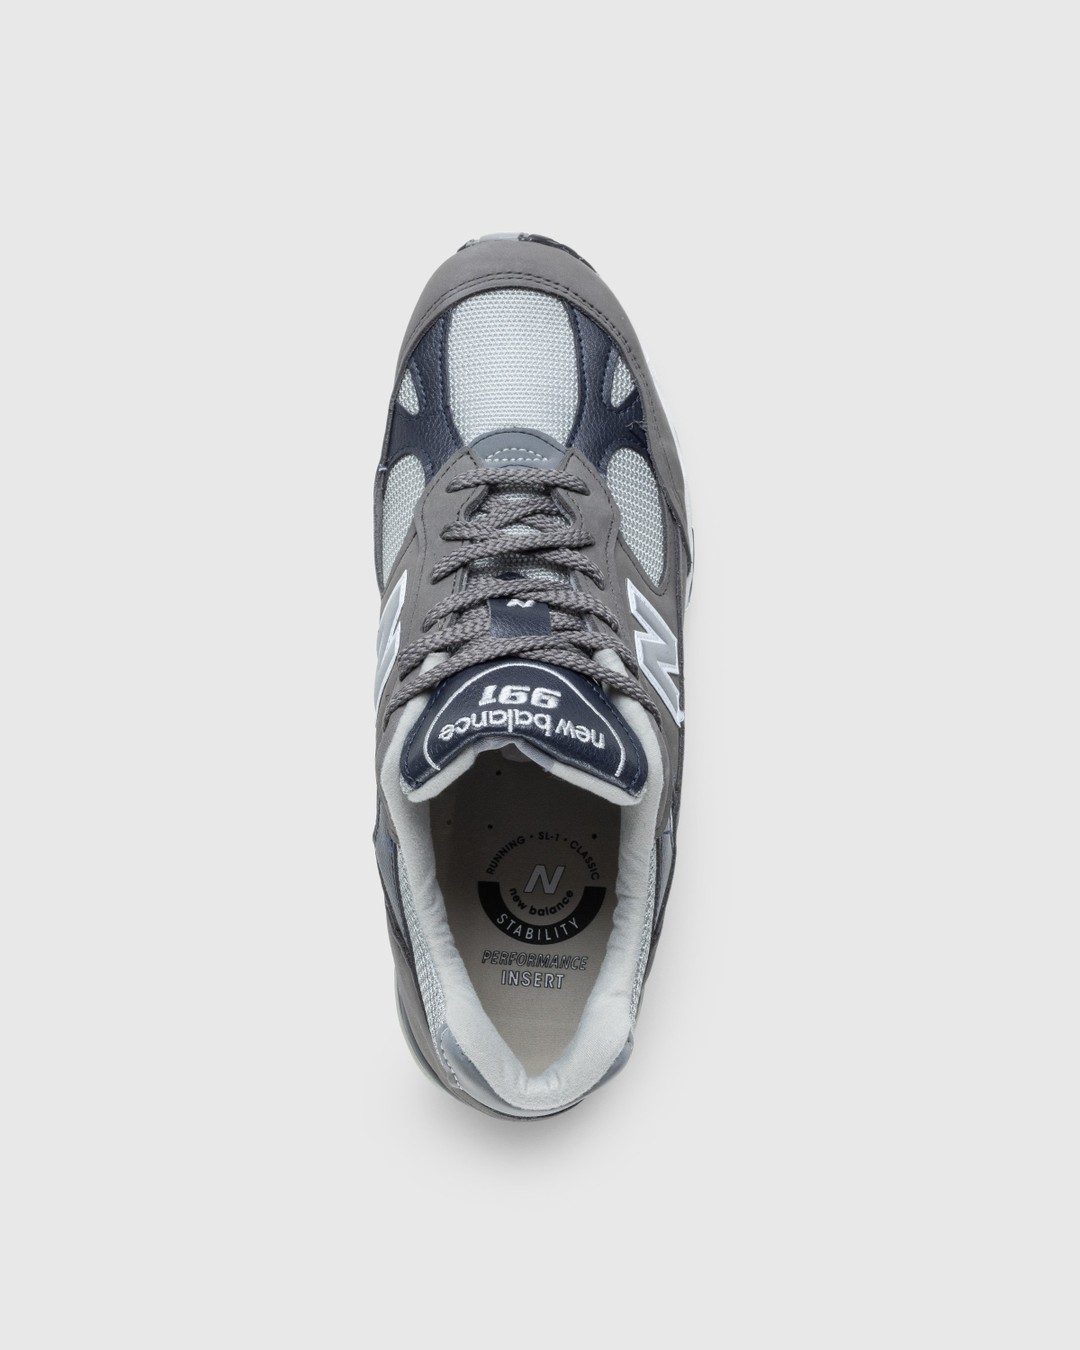 New Balance – M991GNS Grey/Navy - Low Top Sneakers - Grey - Image 5